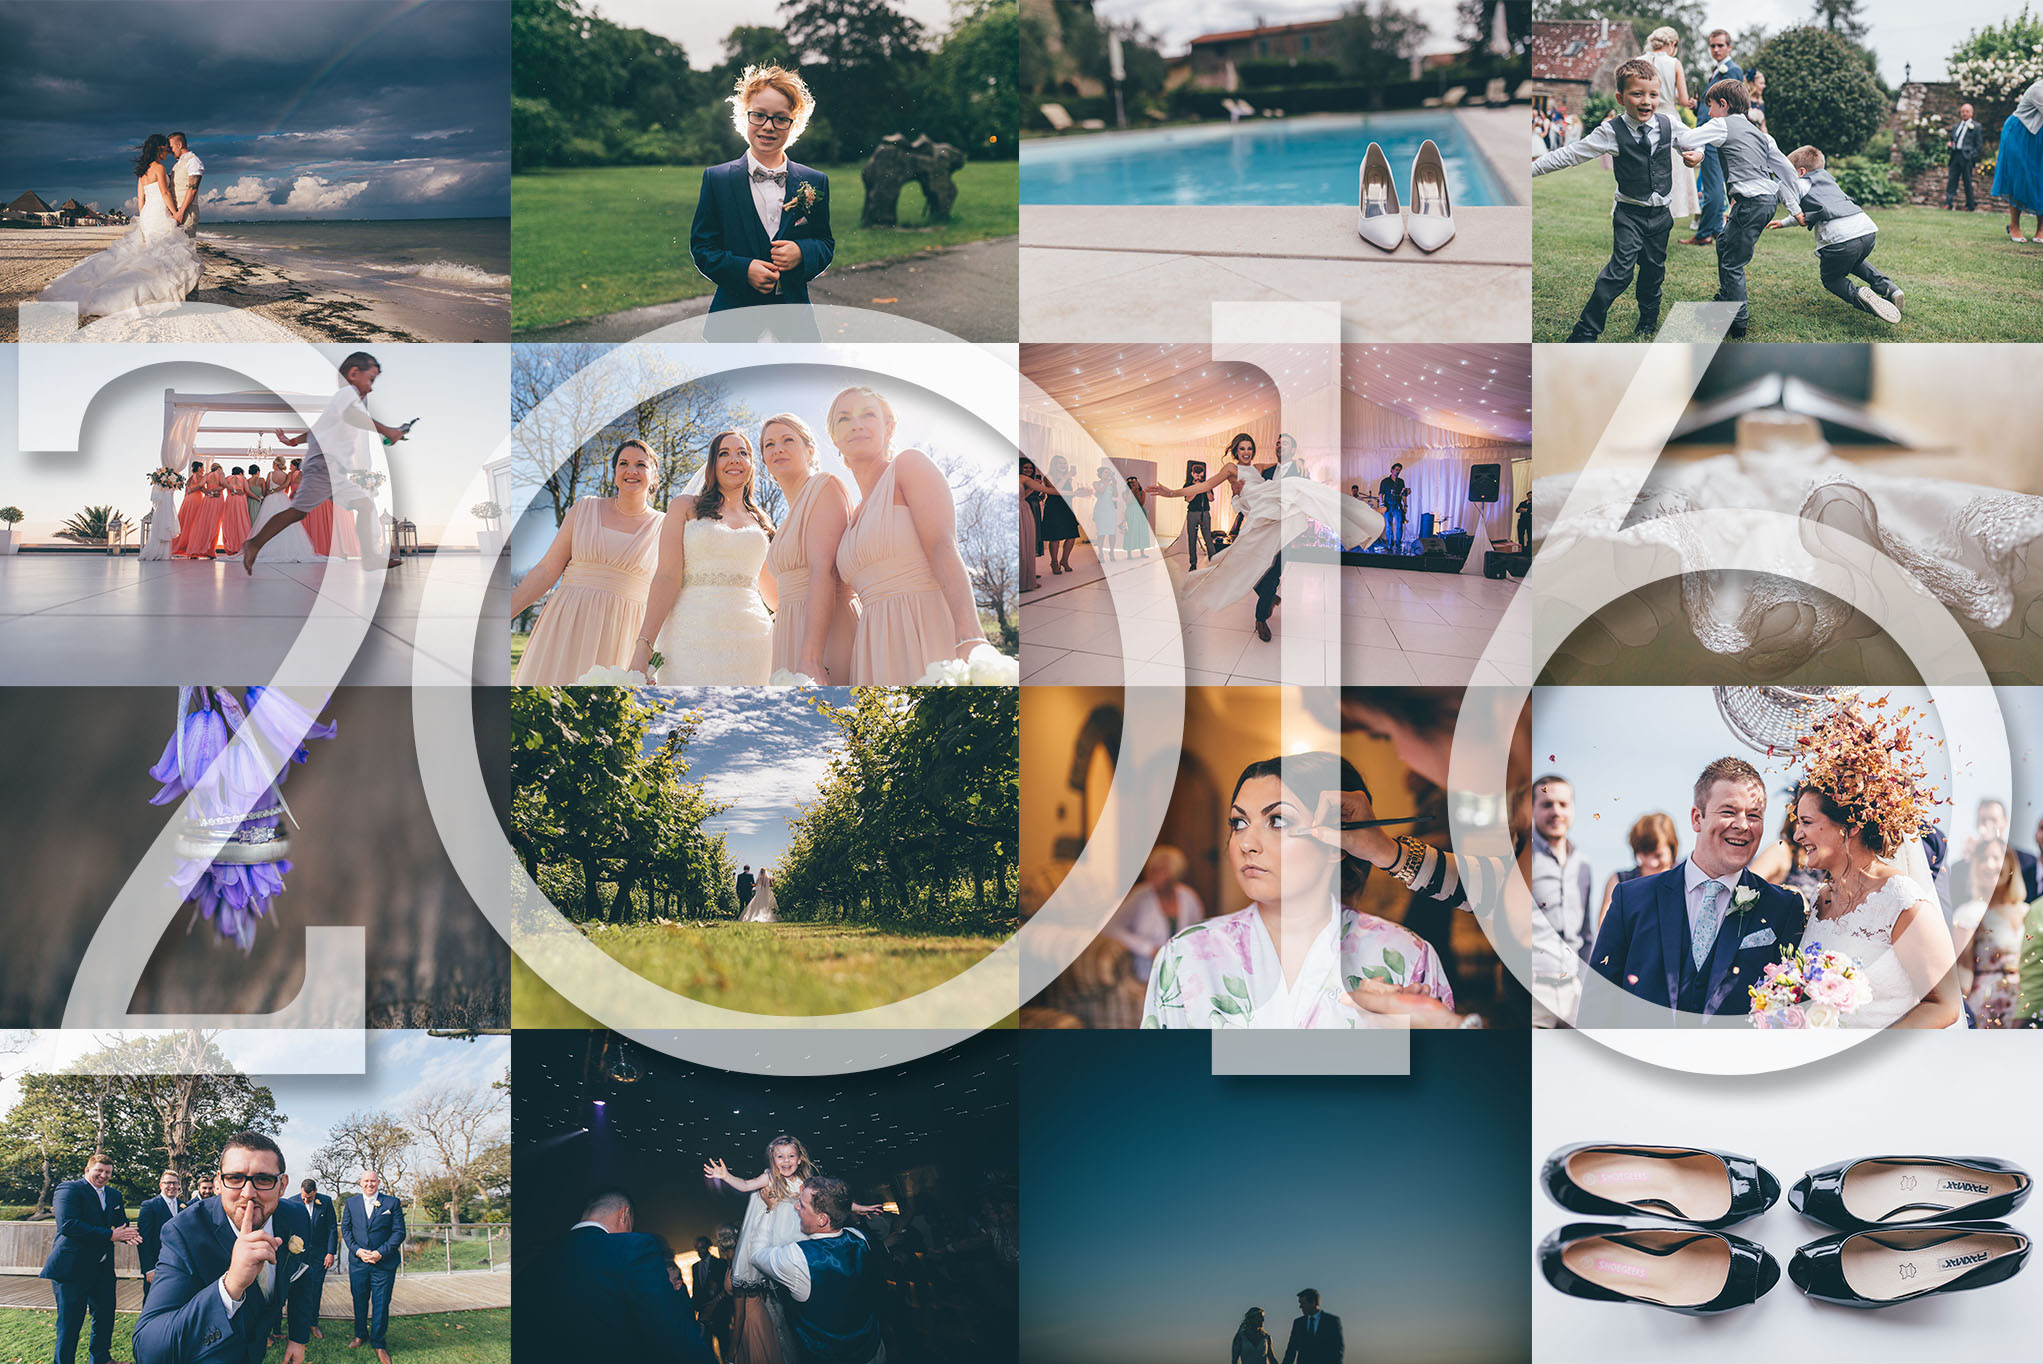 My 2016 Highlights – A Year of Love Stories